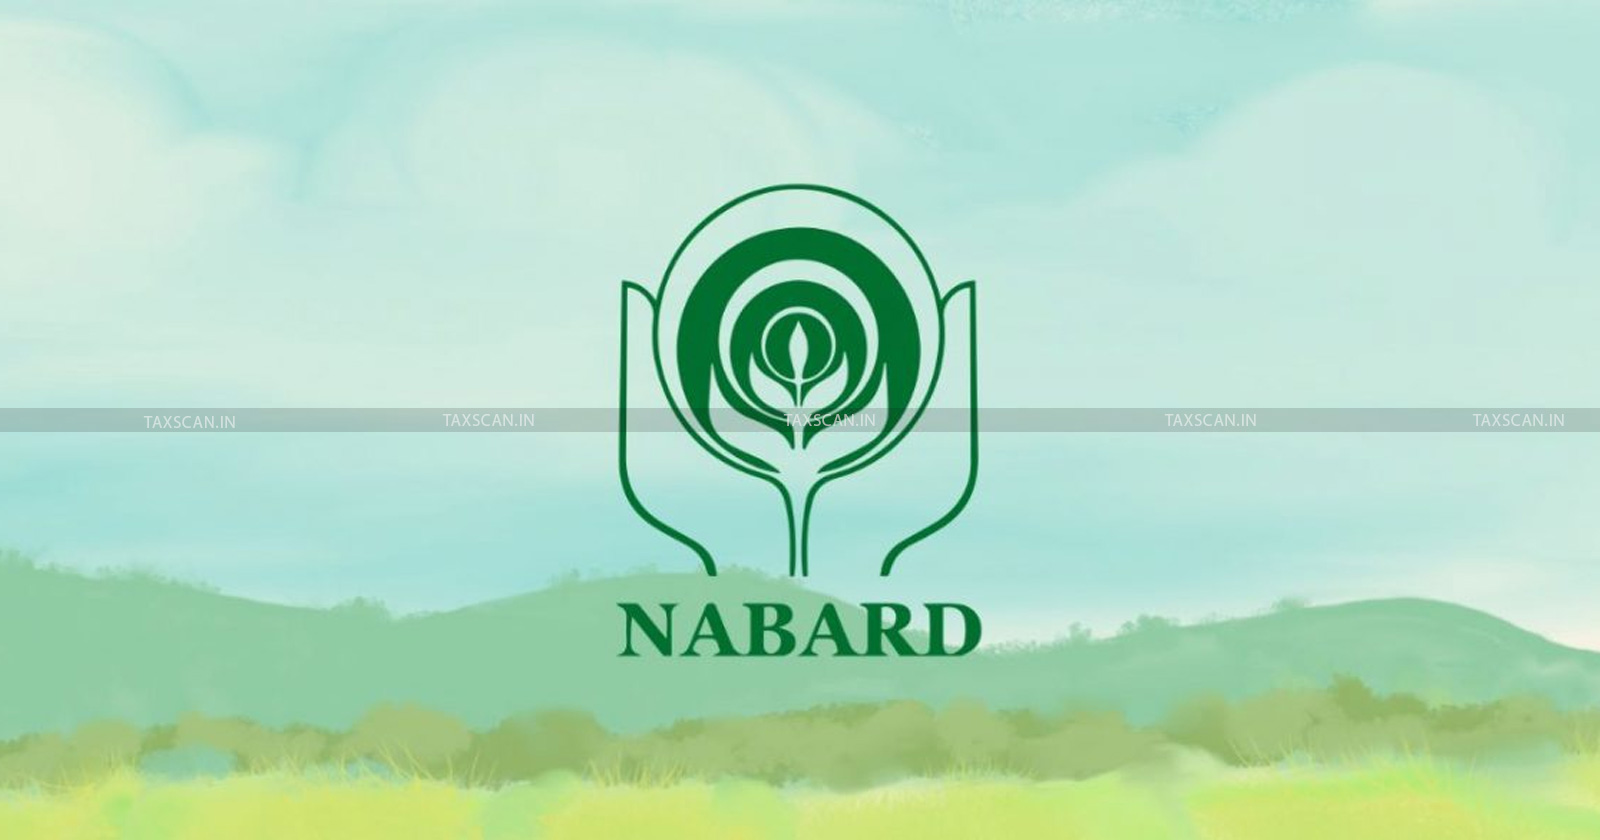 Income tax news - NABARD - Indian government - Disallowance of expenditure - TAXSCAN